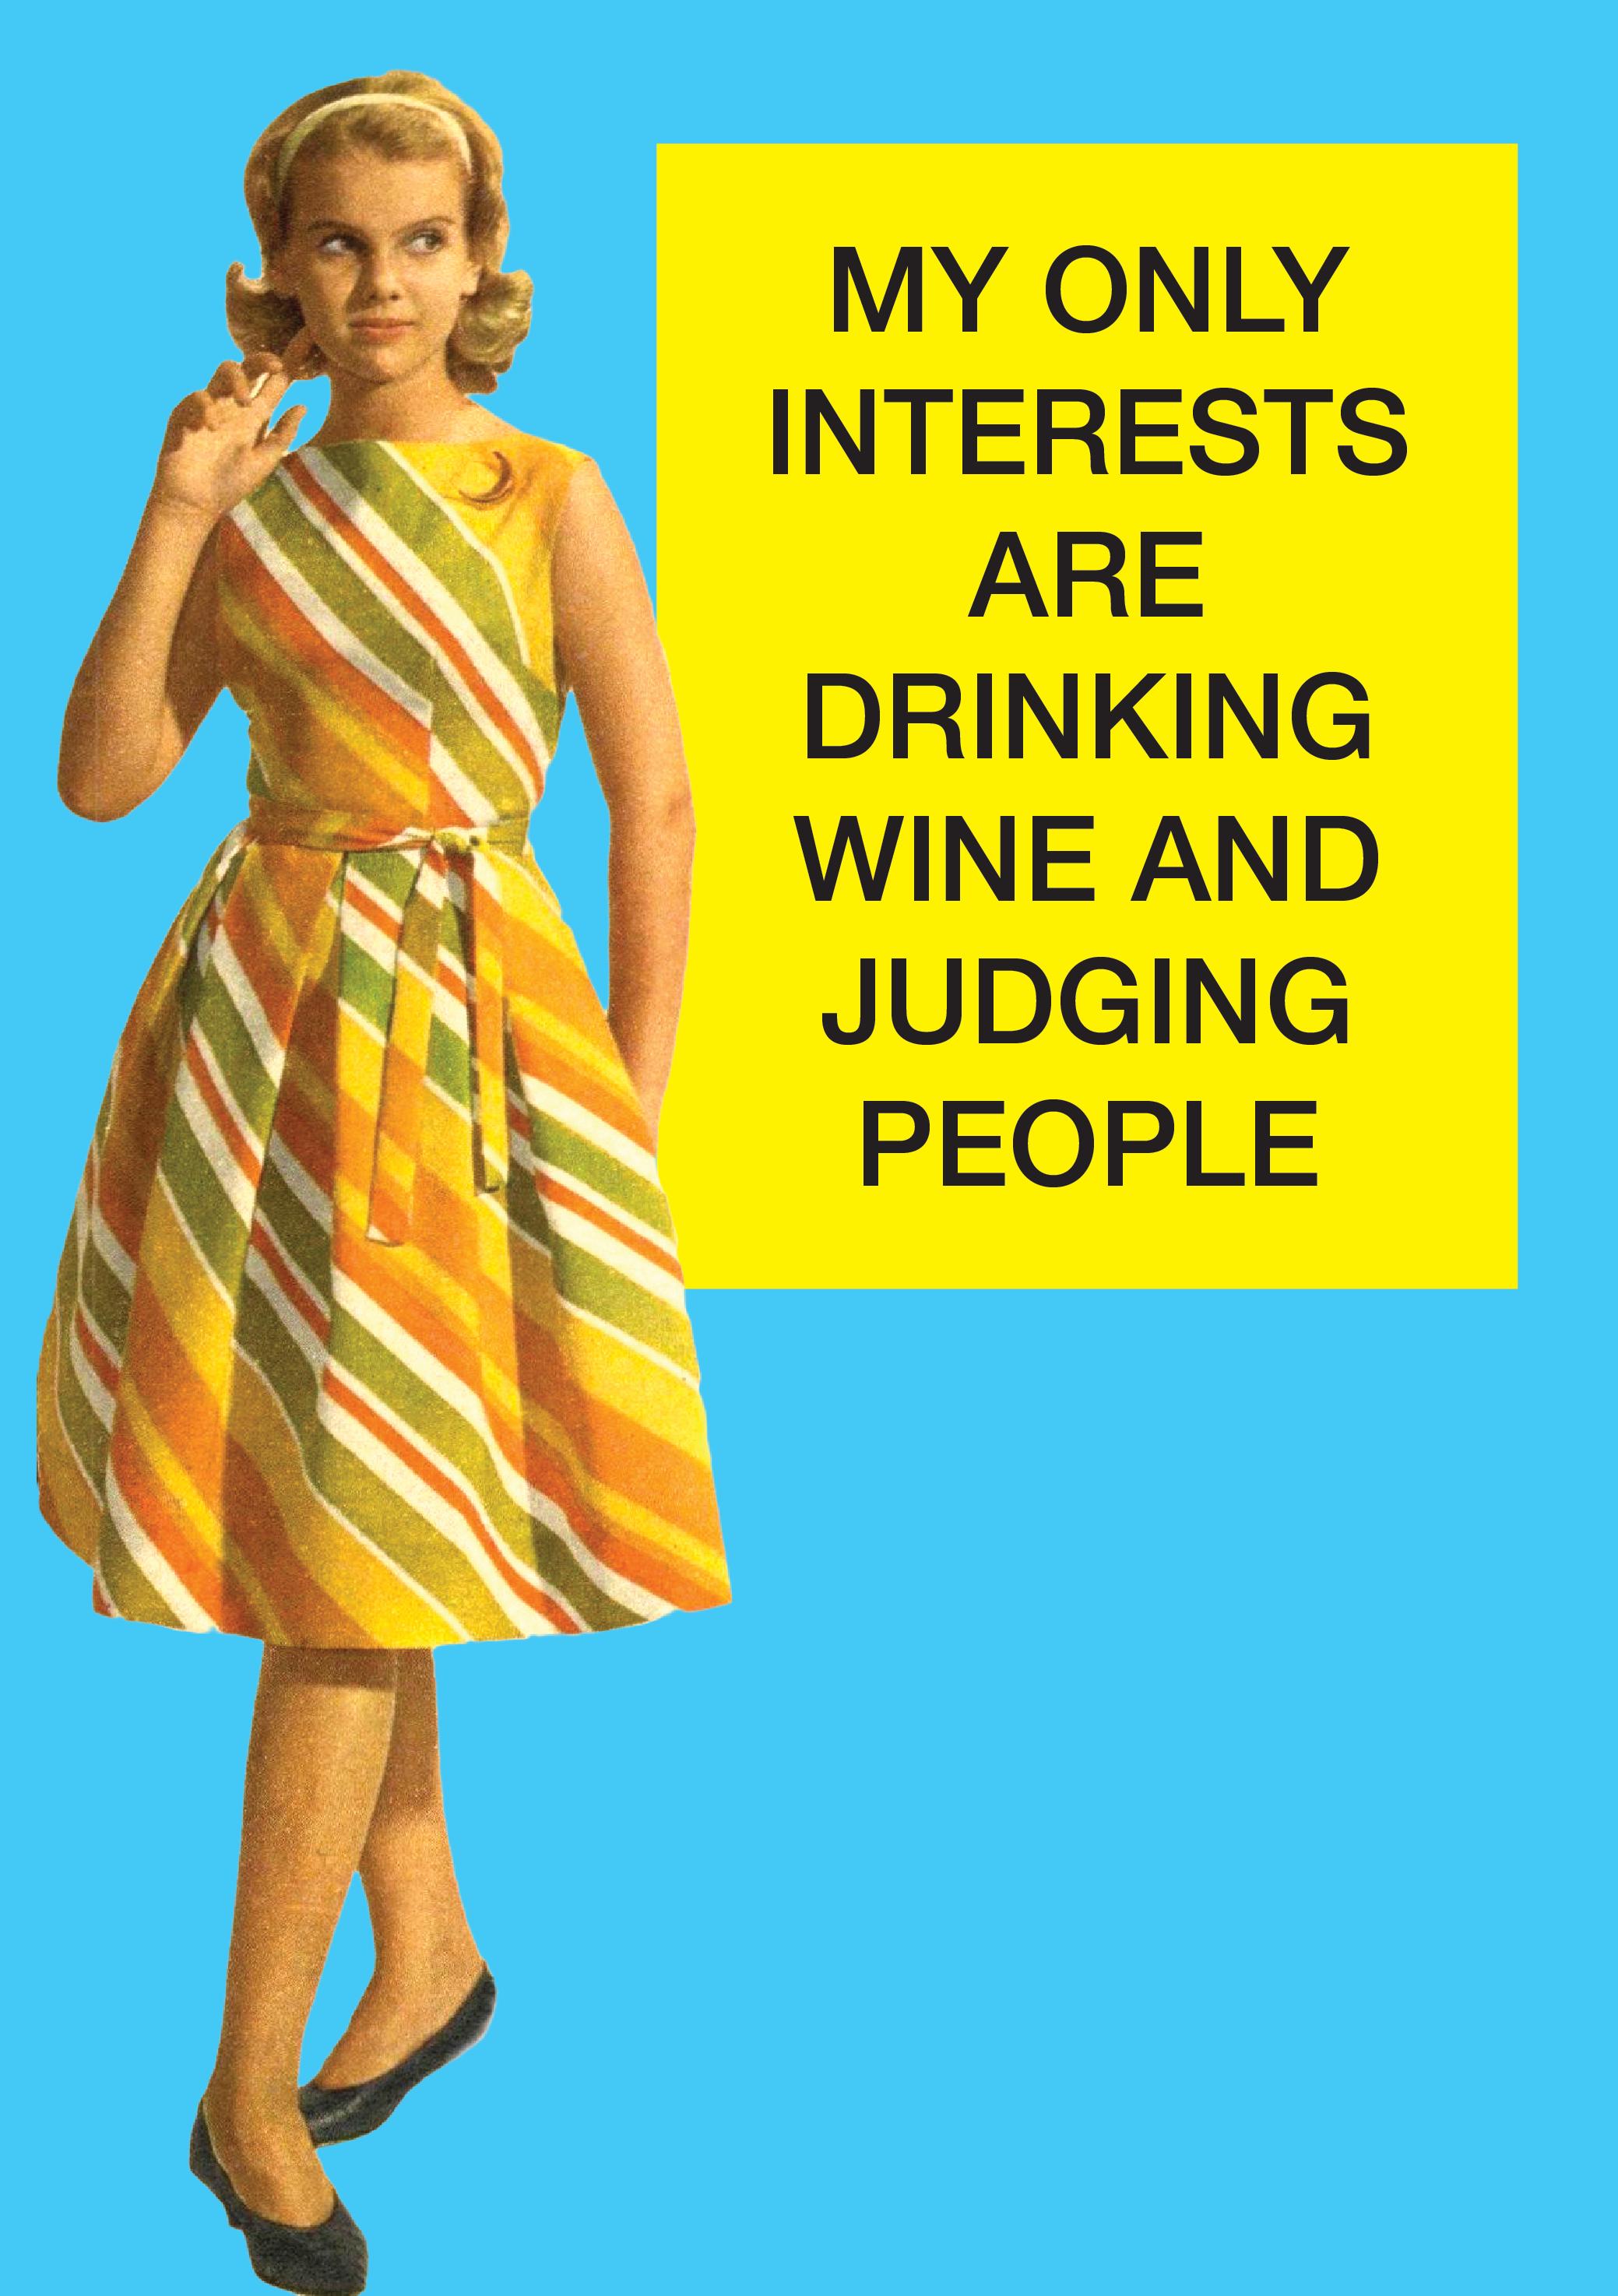 My only interests are Drinking Wine and Judging People